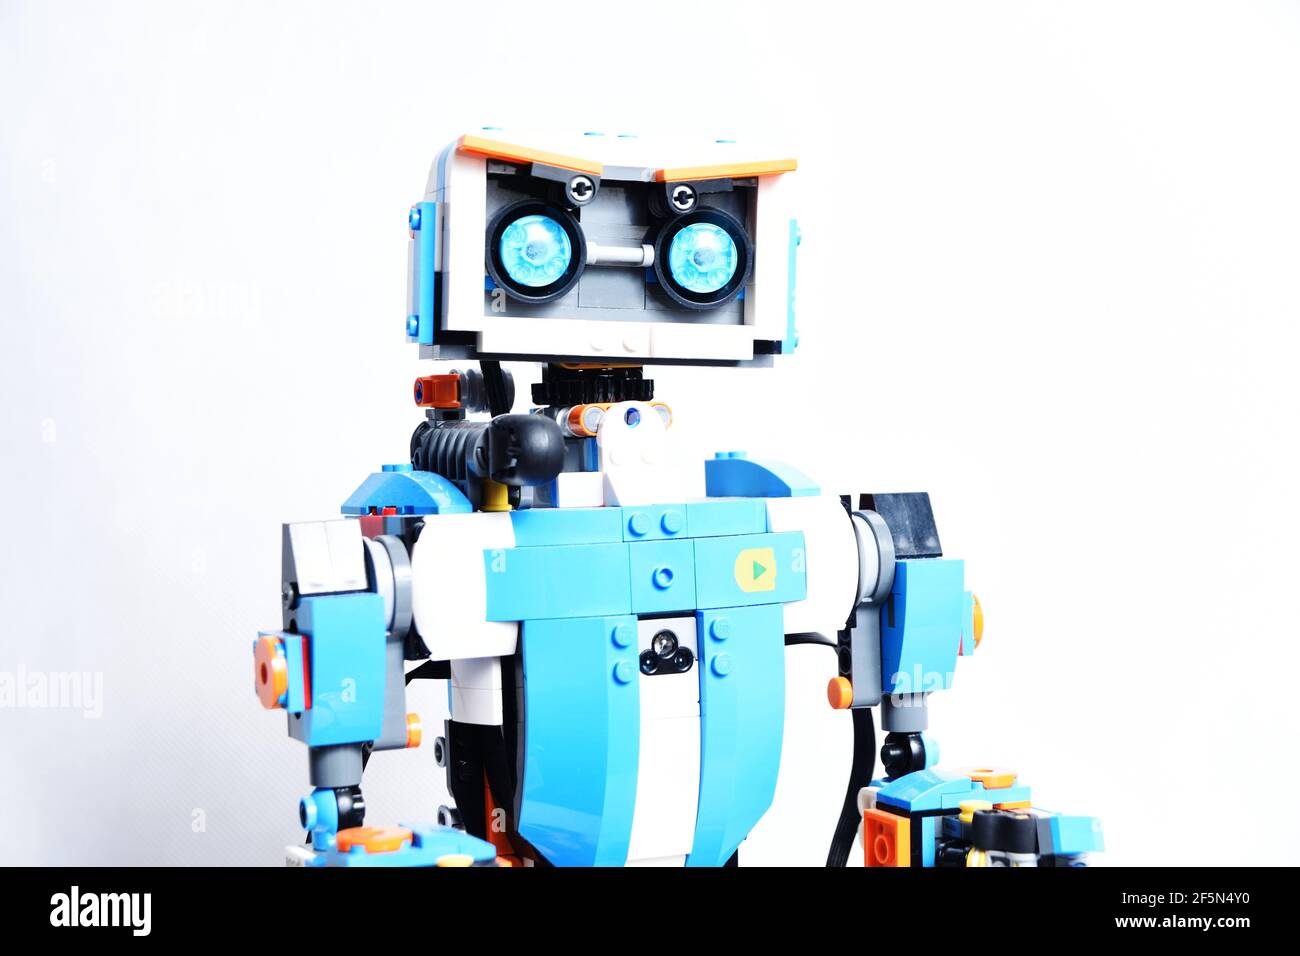 Lego Boost - lego robot Vernie. Smart toy that can be controlled by phone  with bluetooth Stock Photo - Alamy